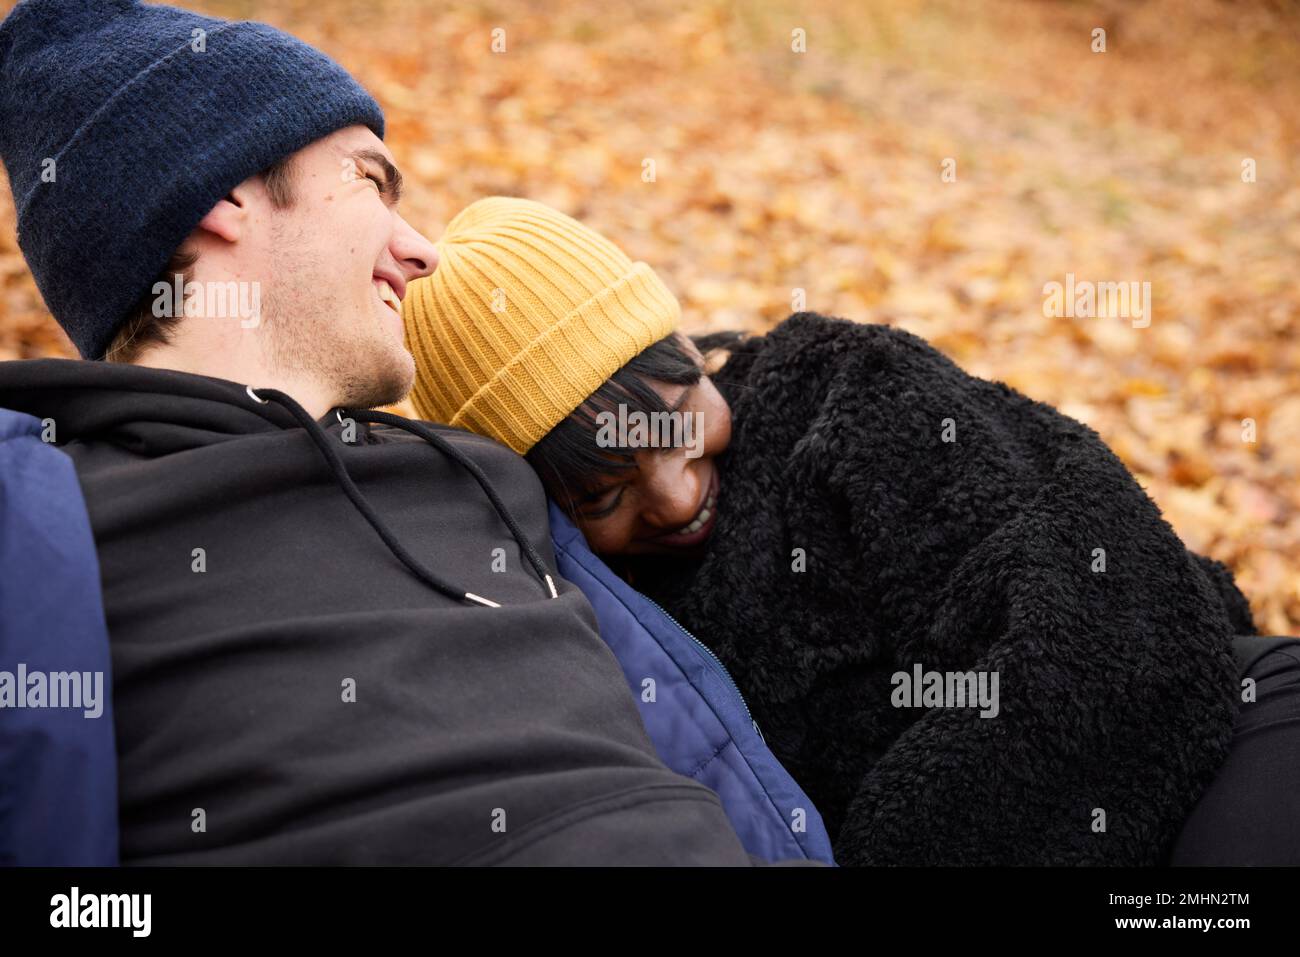 Jeune couple lying together Banque D'Images